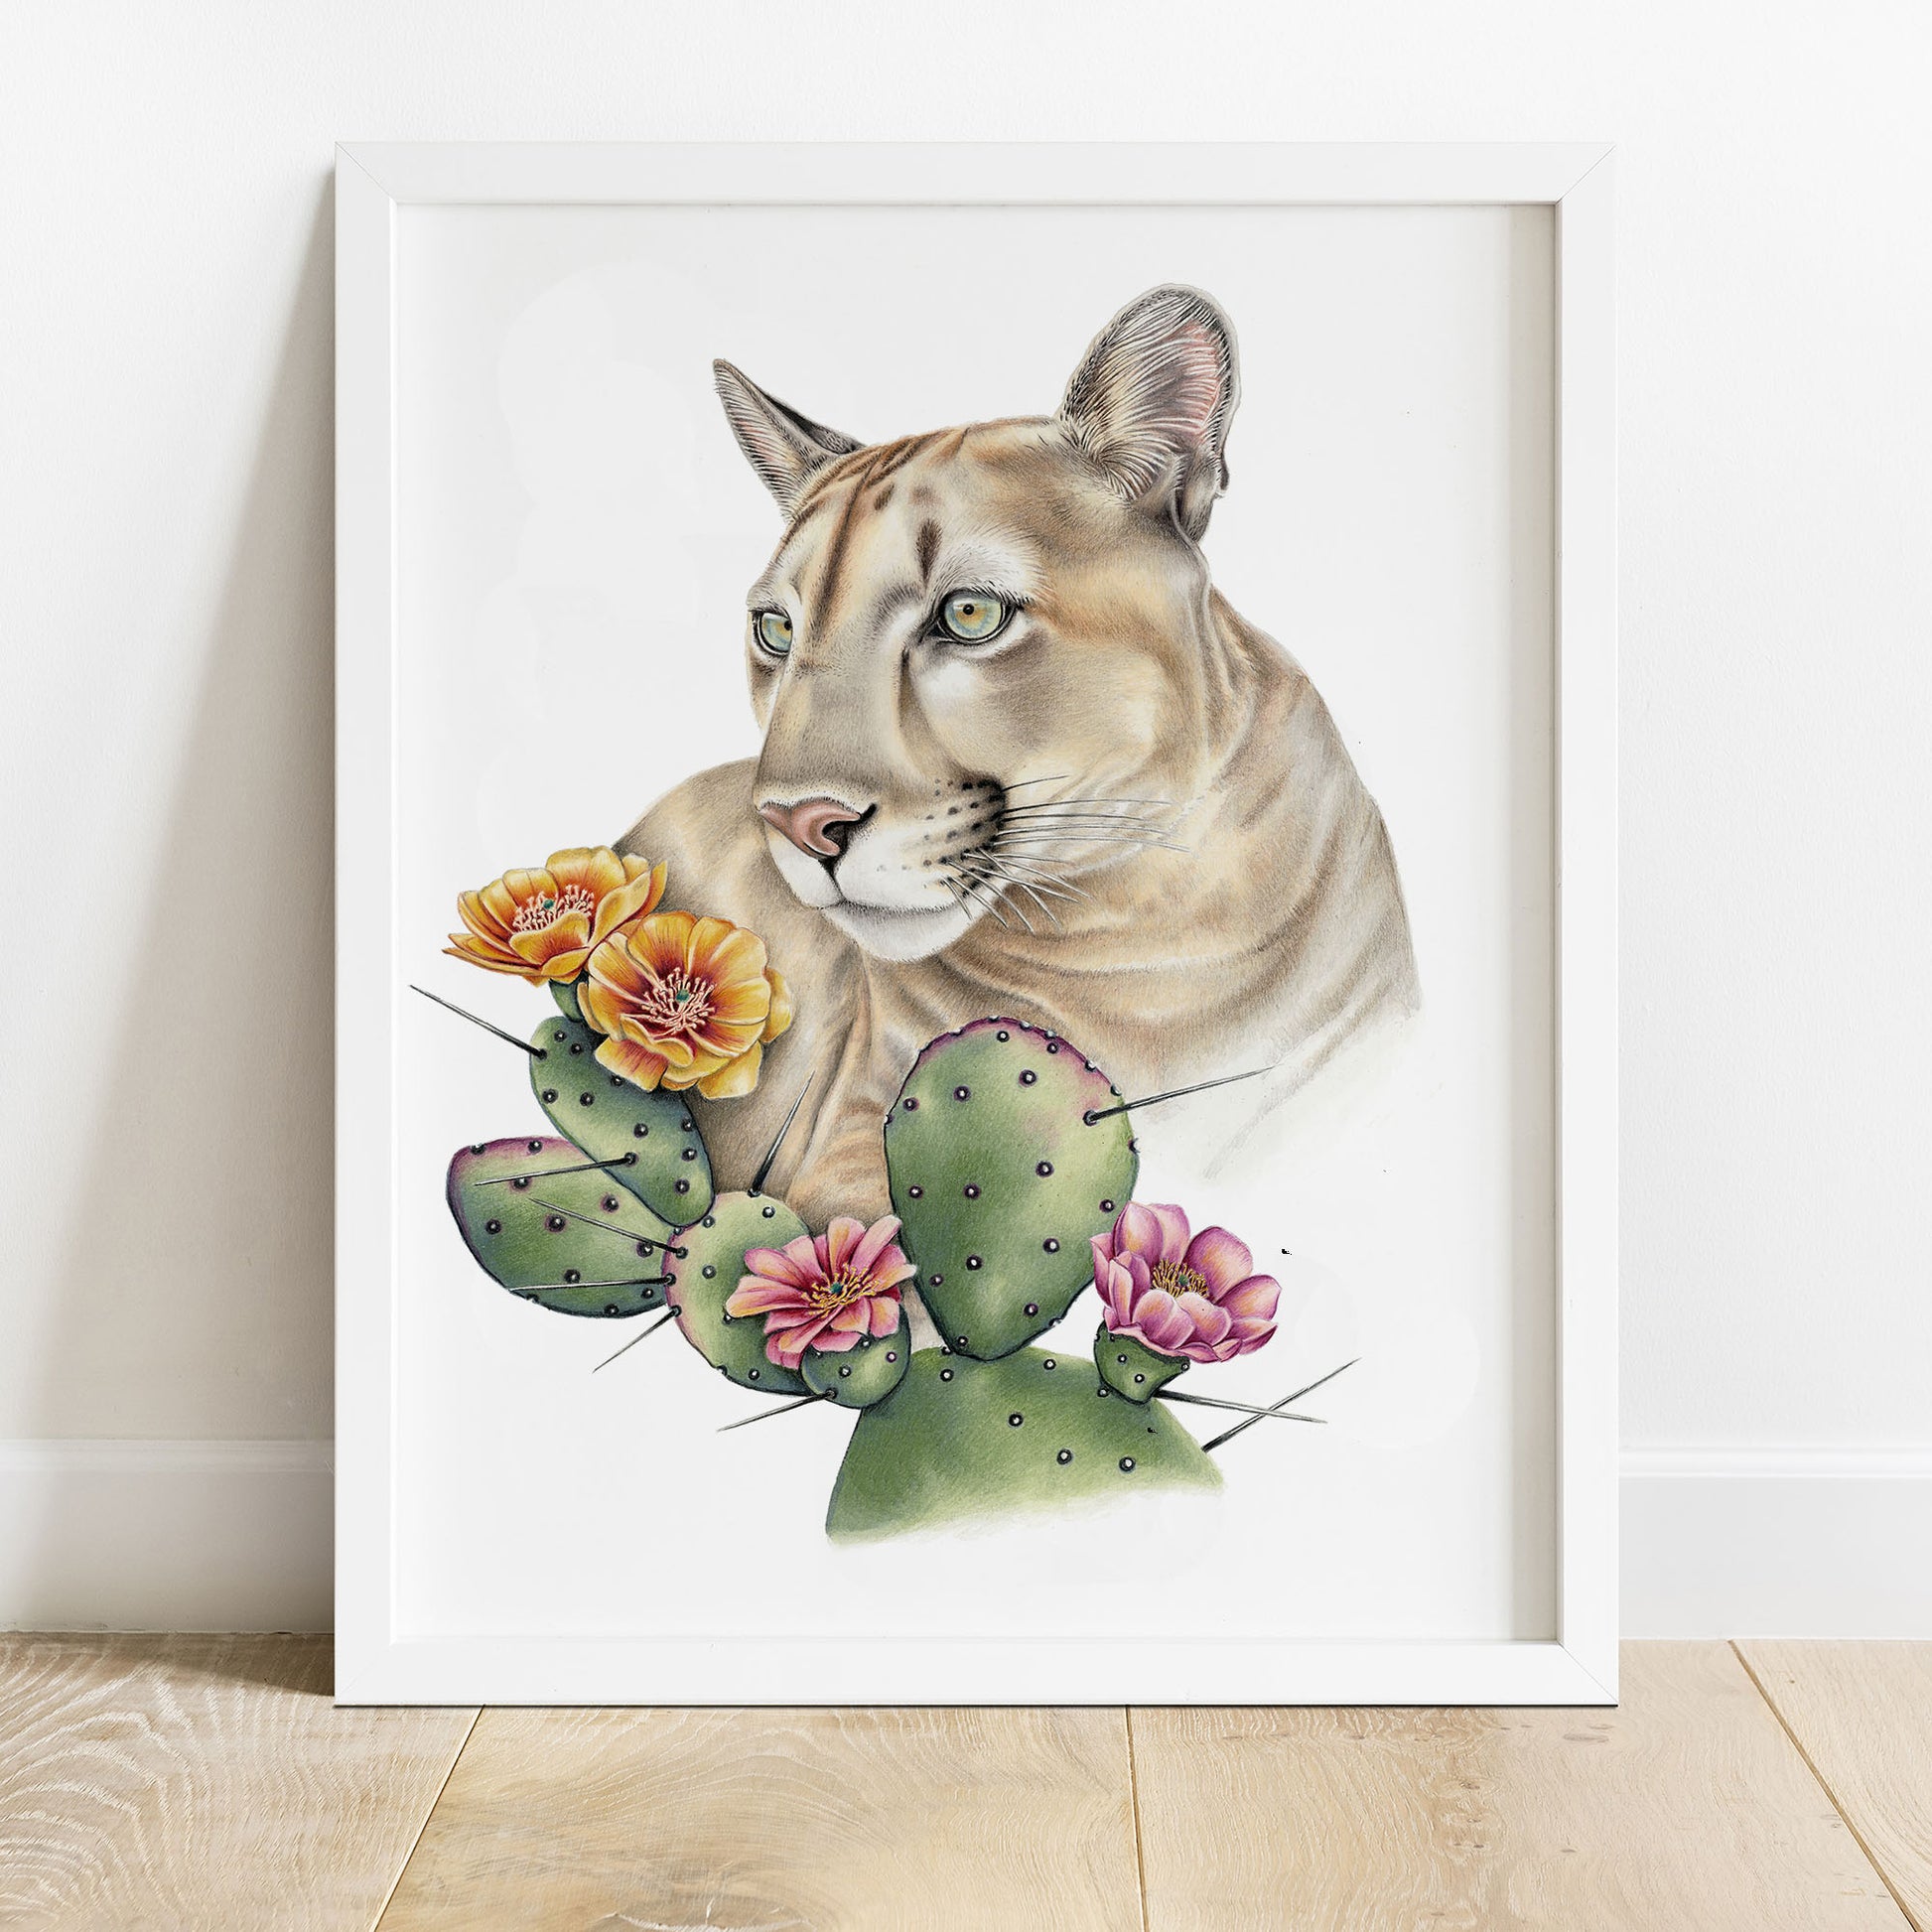 hand drawn colored pencil illustration of a mountain lion with Opuntia cactus, prints available.